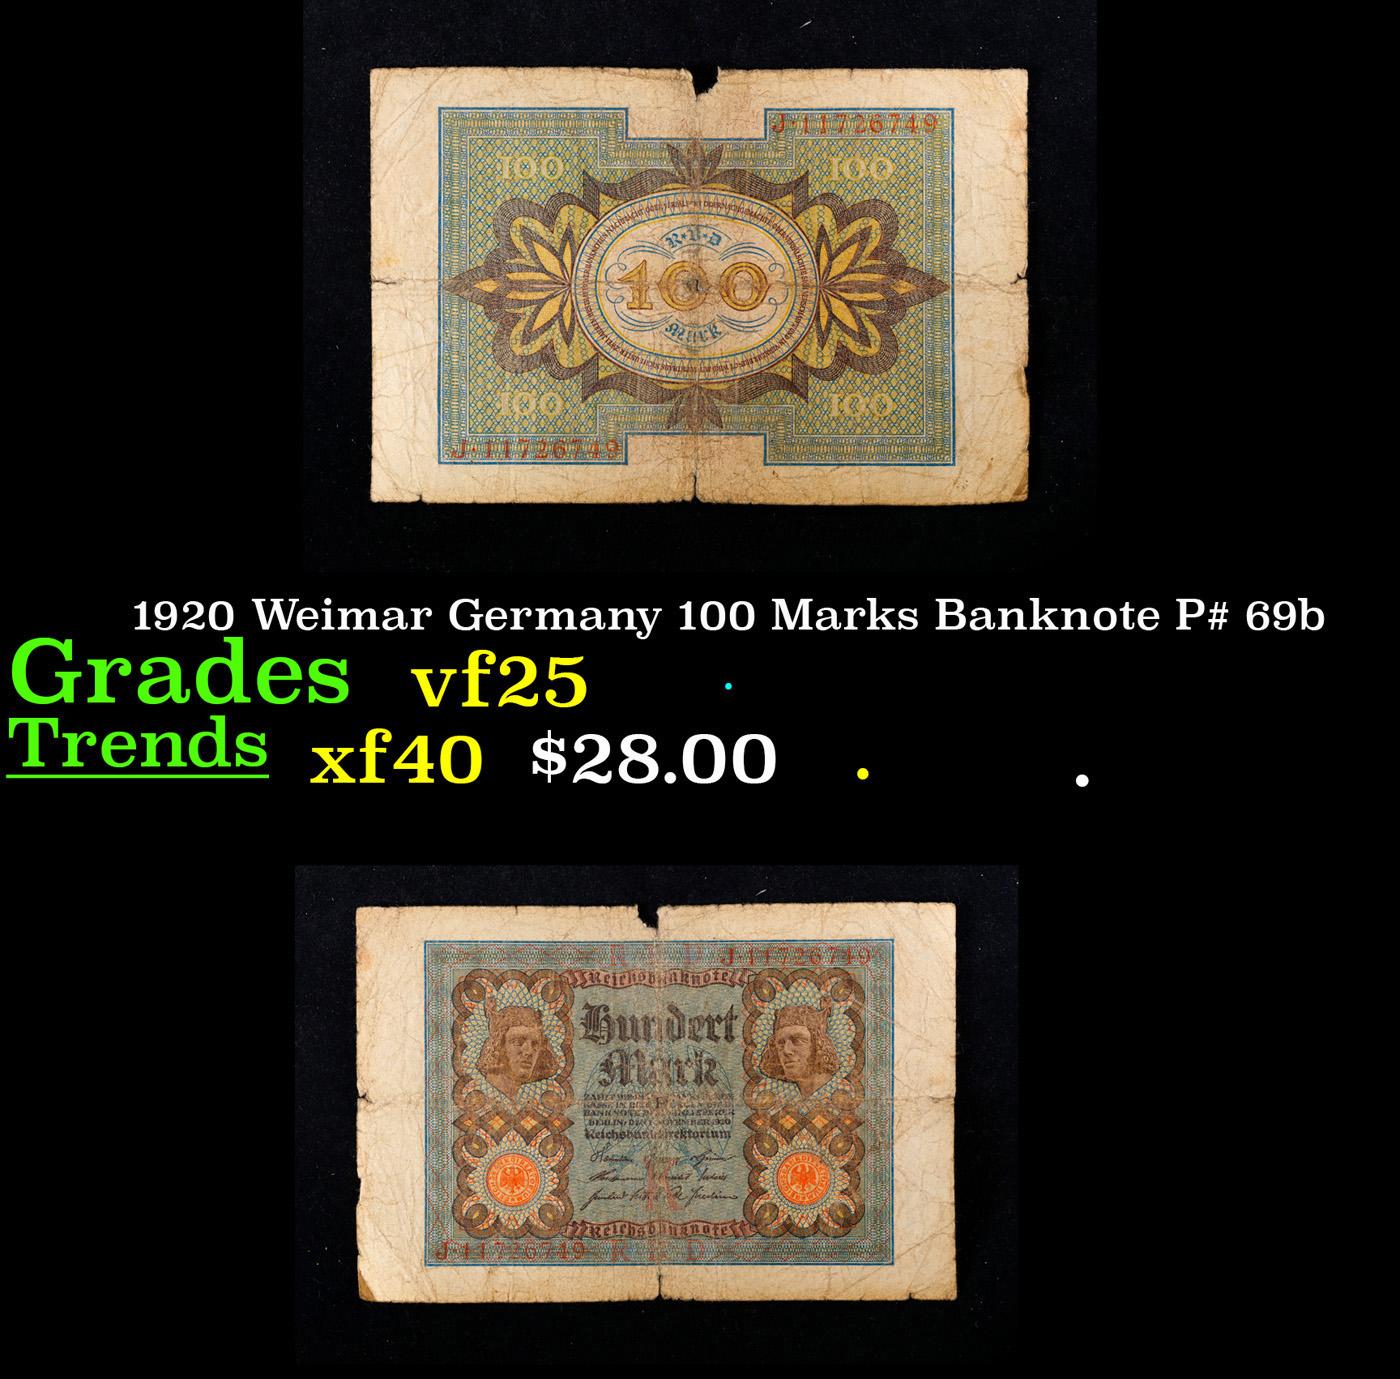 1920 Weimar Germany 100 Marks Banknote P# 69b Grades vf+